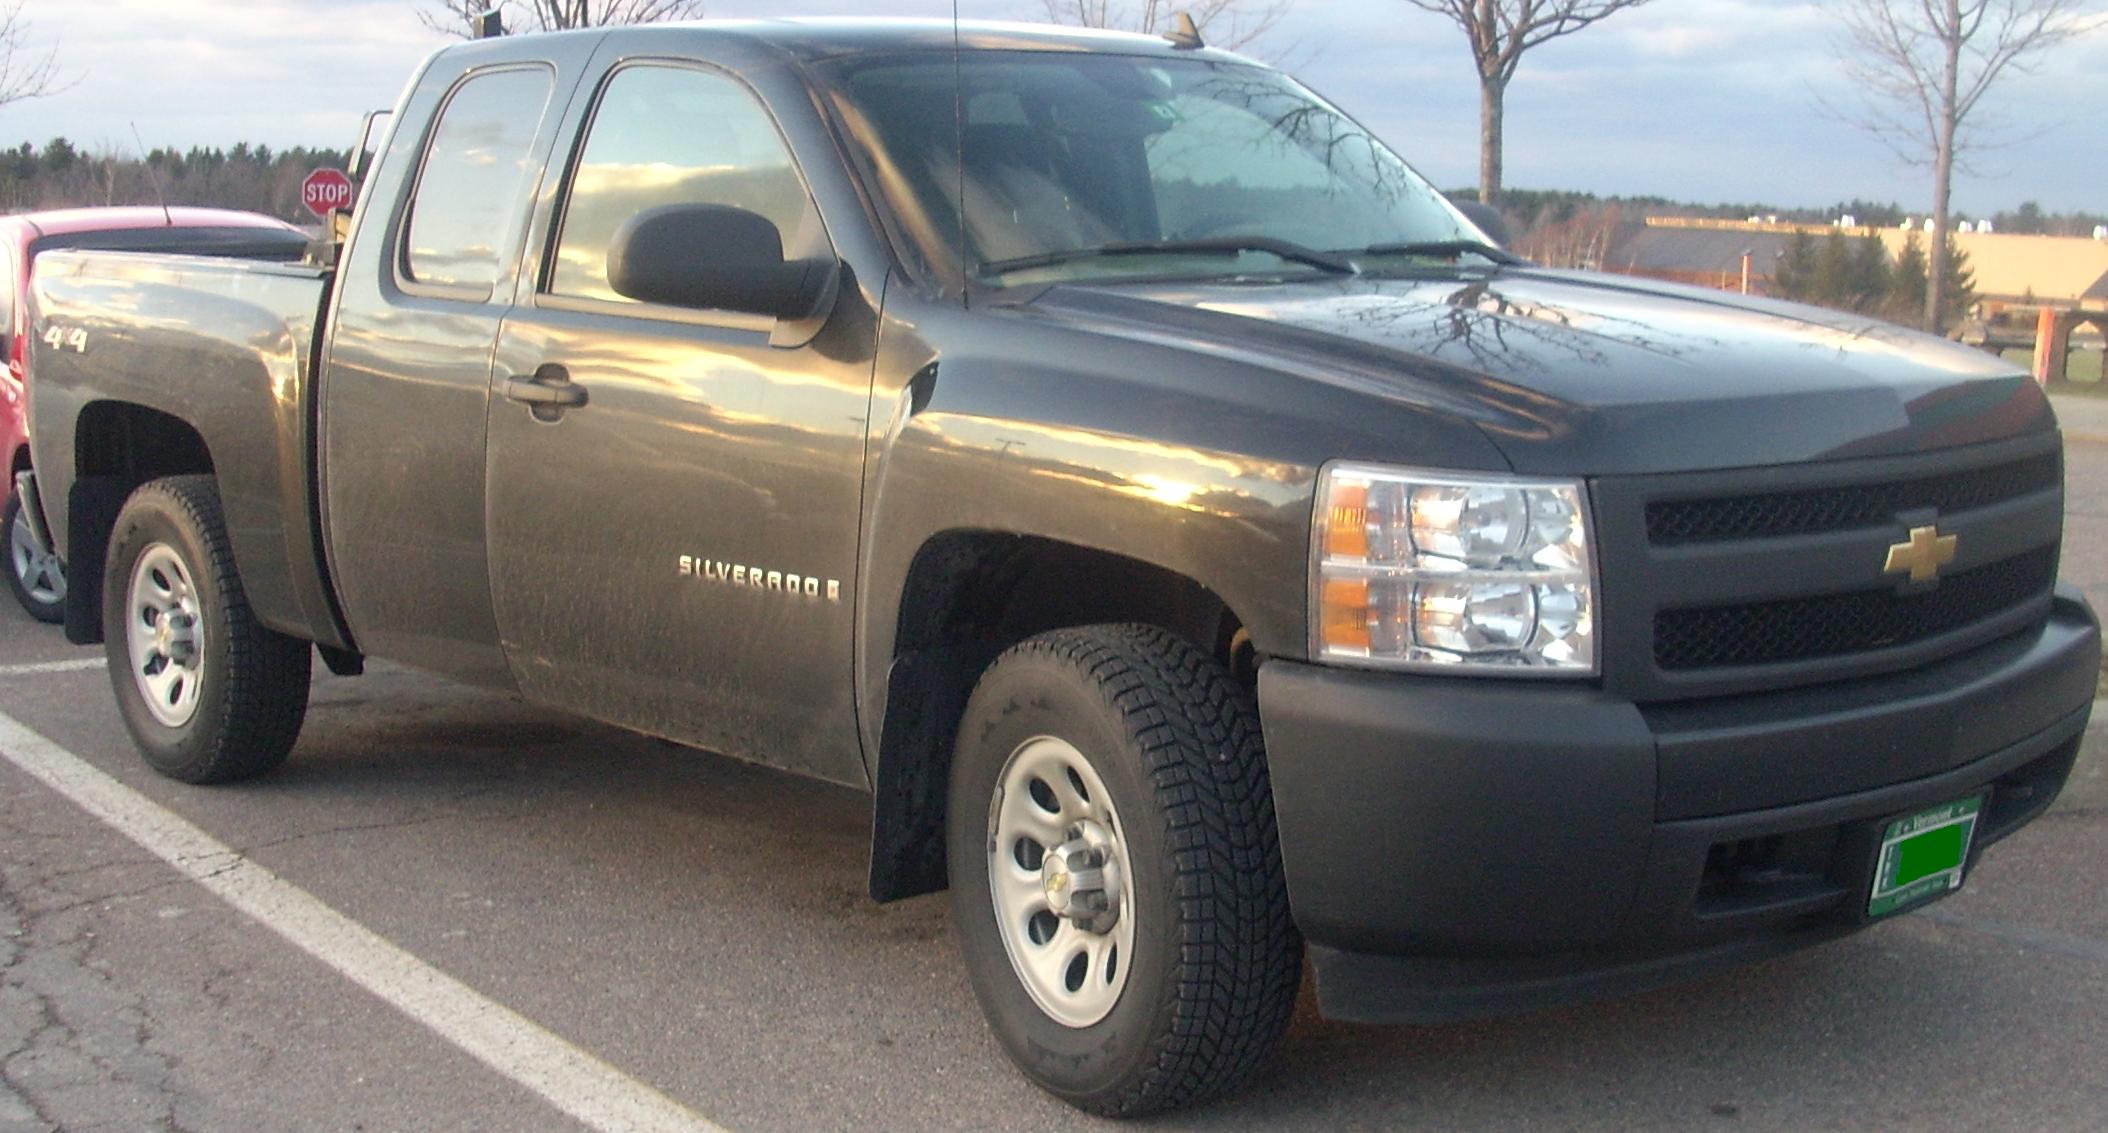 Chevrolet Silverado one of the easiest cars to work on